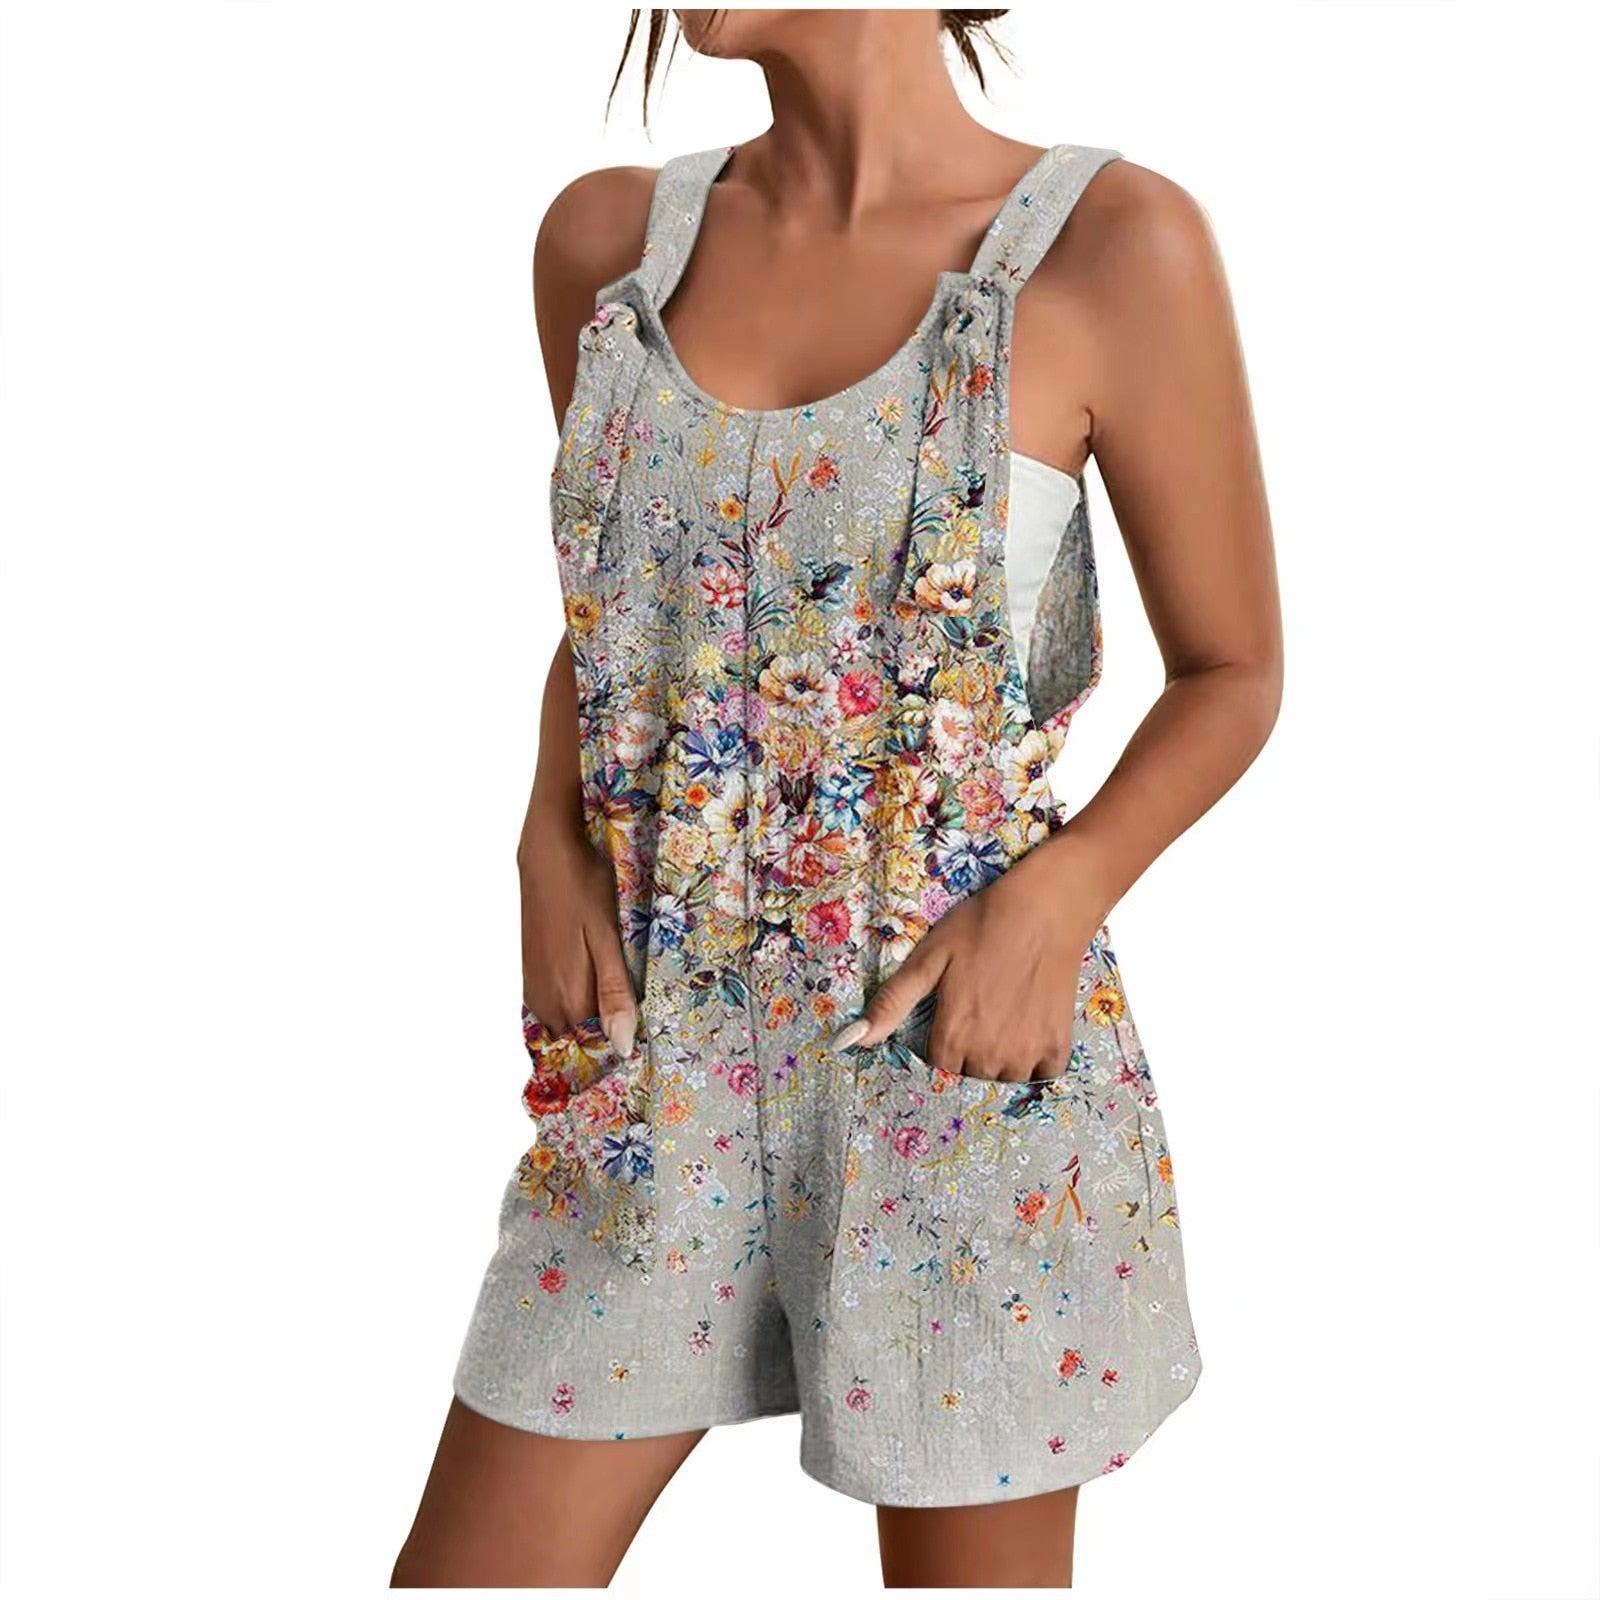 Rompers for Women Summer Wide Leg Jumpsuits Tie Knot Strap Shorts Romper Comfy Casual Overalls with Pockets